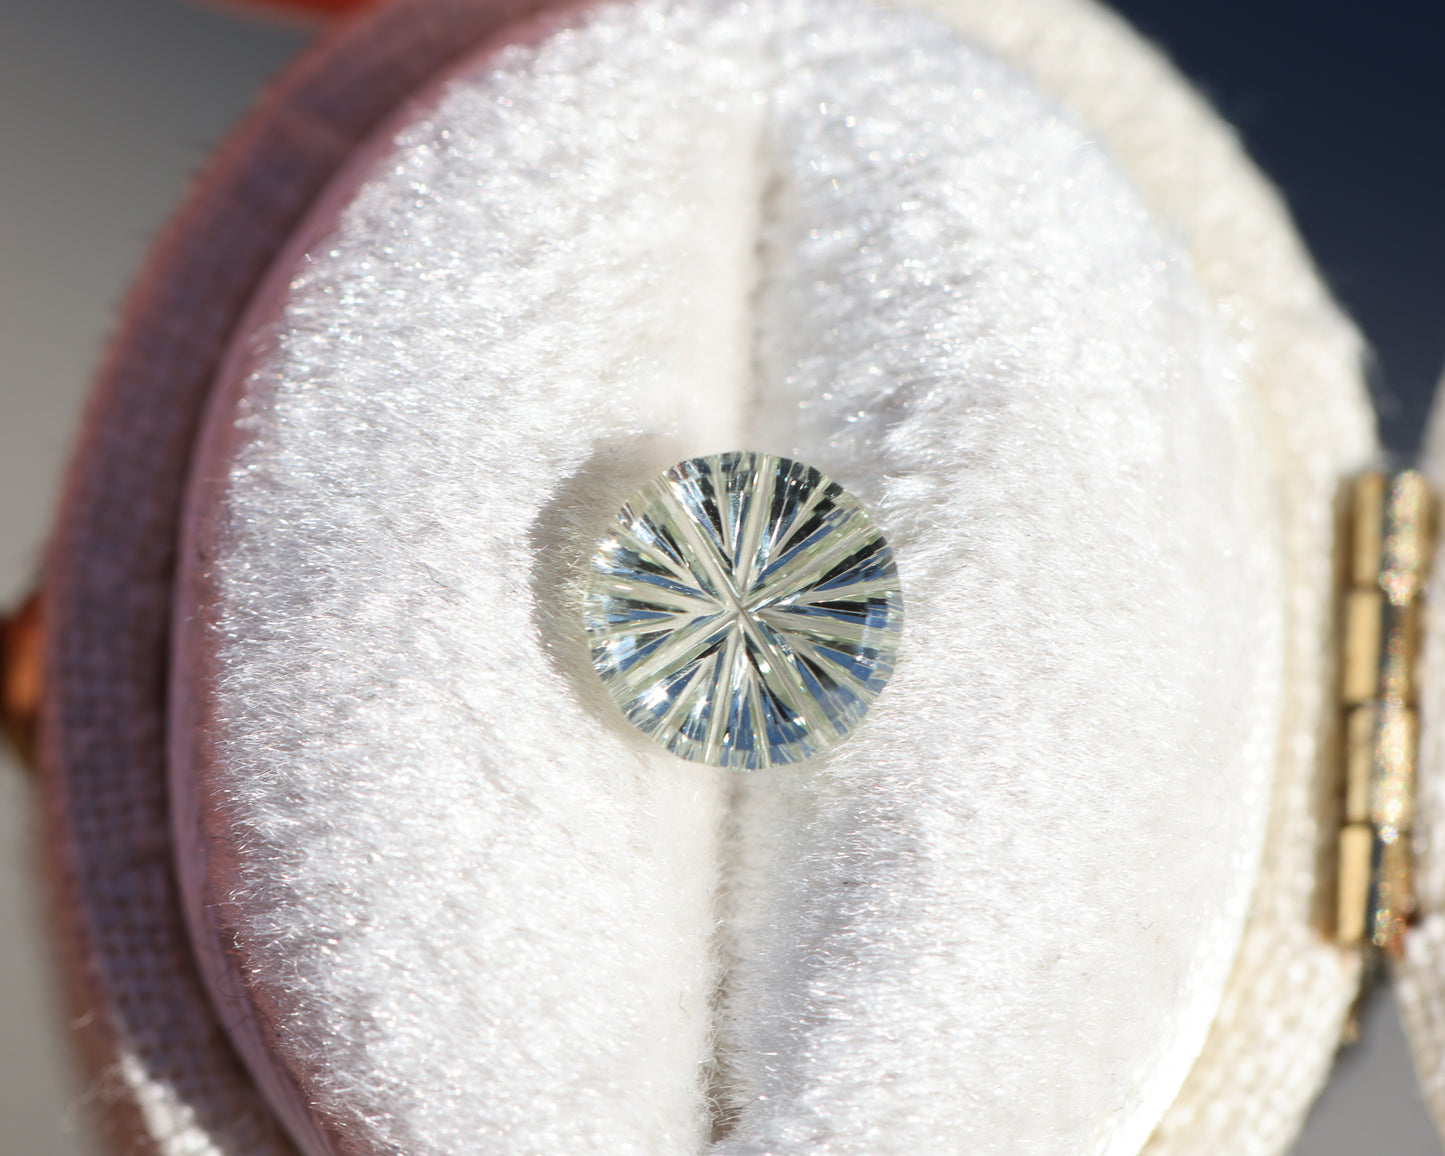 Load image into Gallery viewer, 1.19ct round light yellow green sapphire - Starbrite cut by John Dyer
